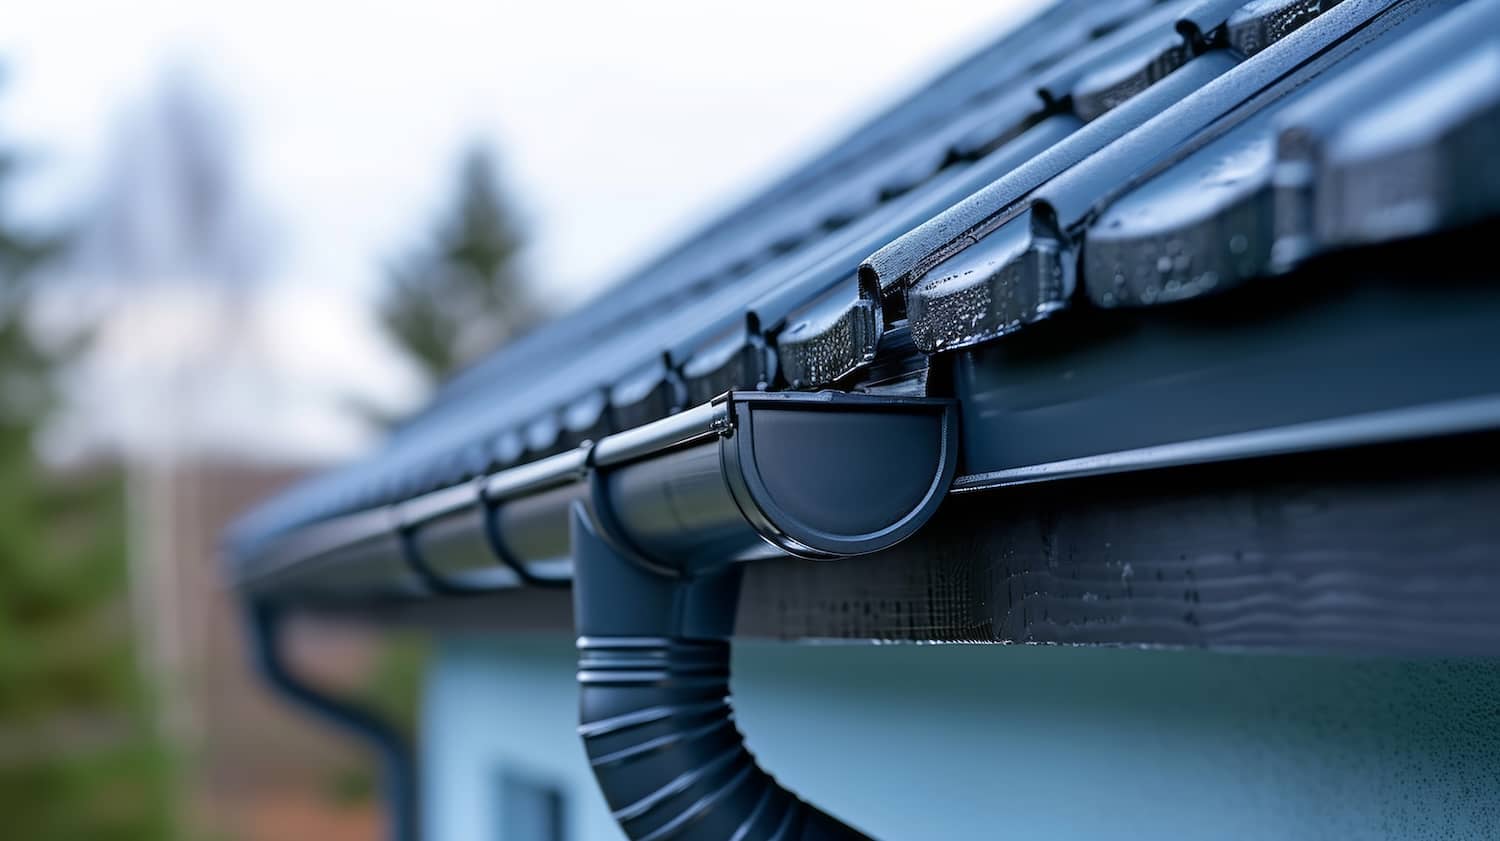 In all colors, metal roofing requires regular maintenance to protect the home. 